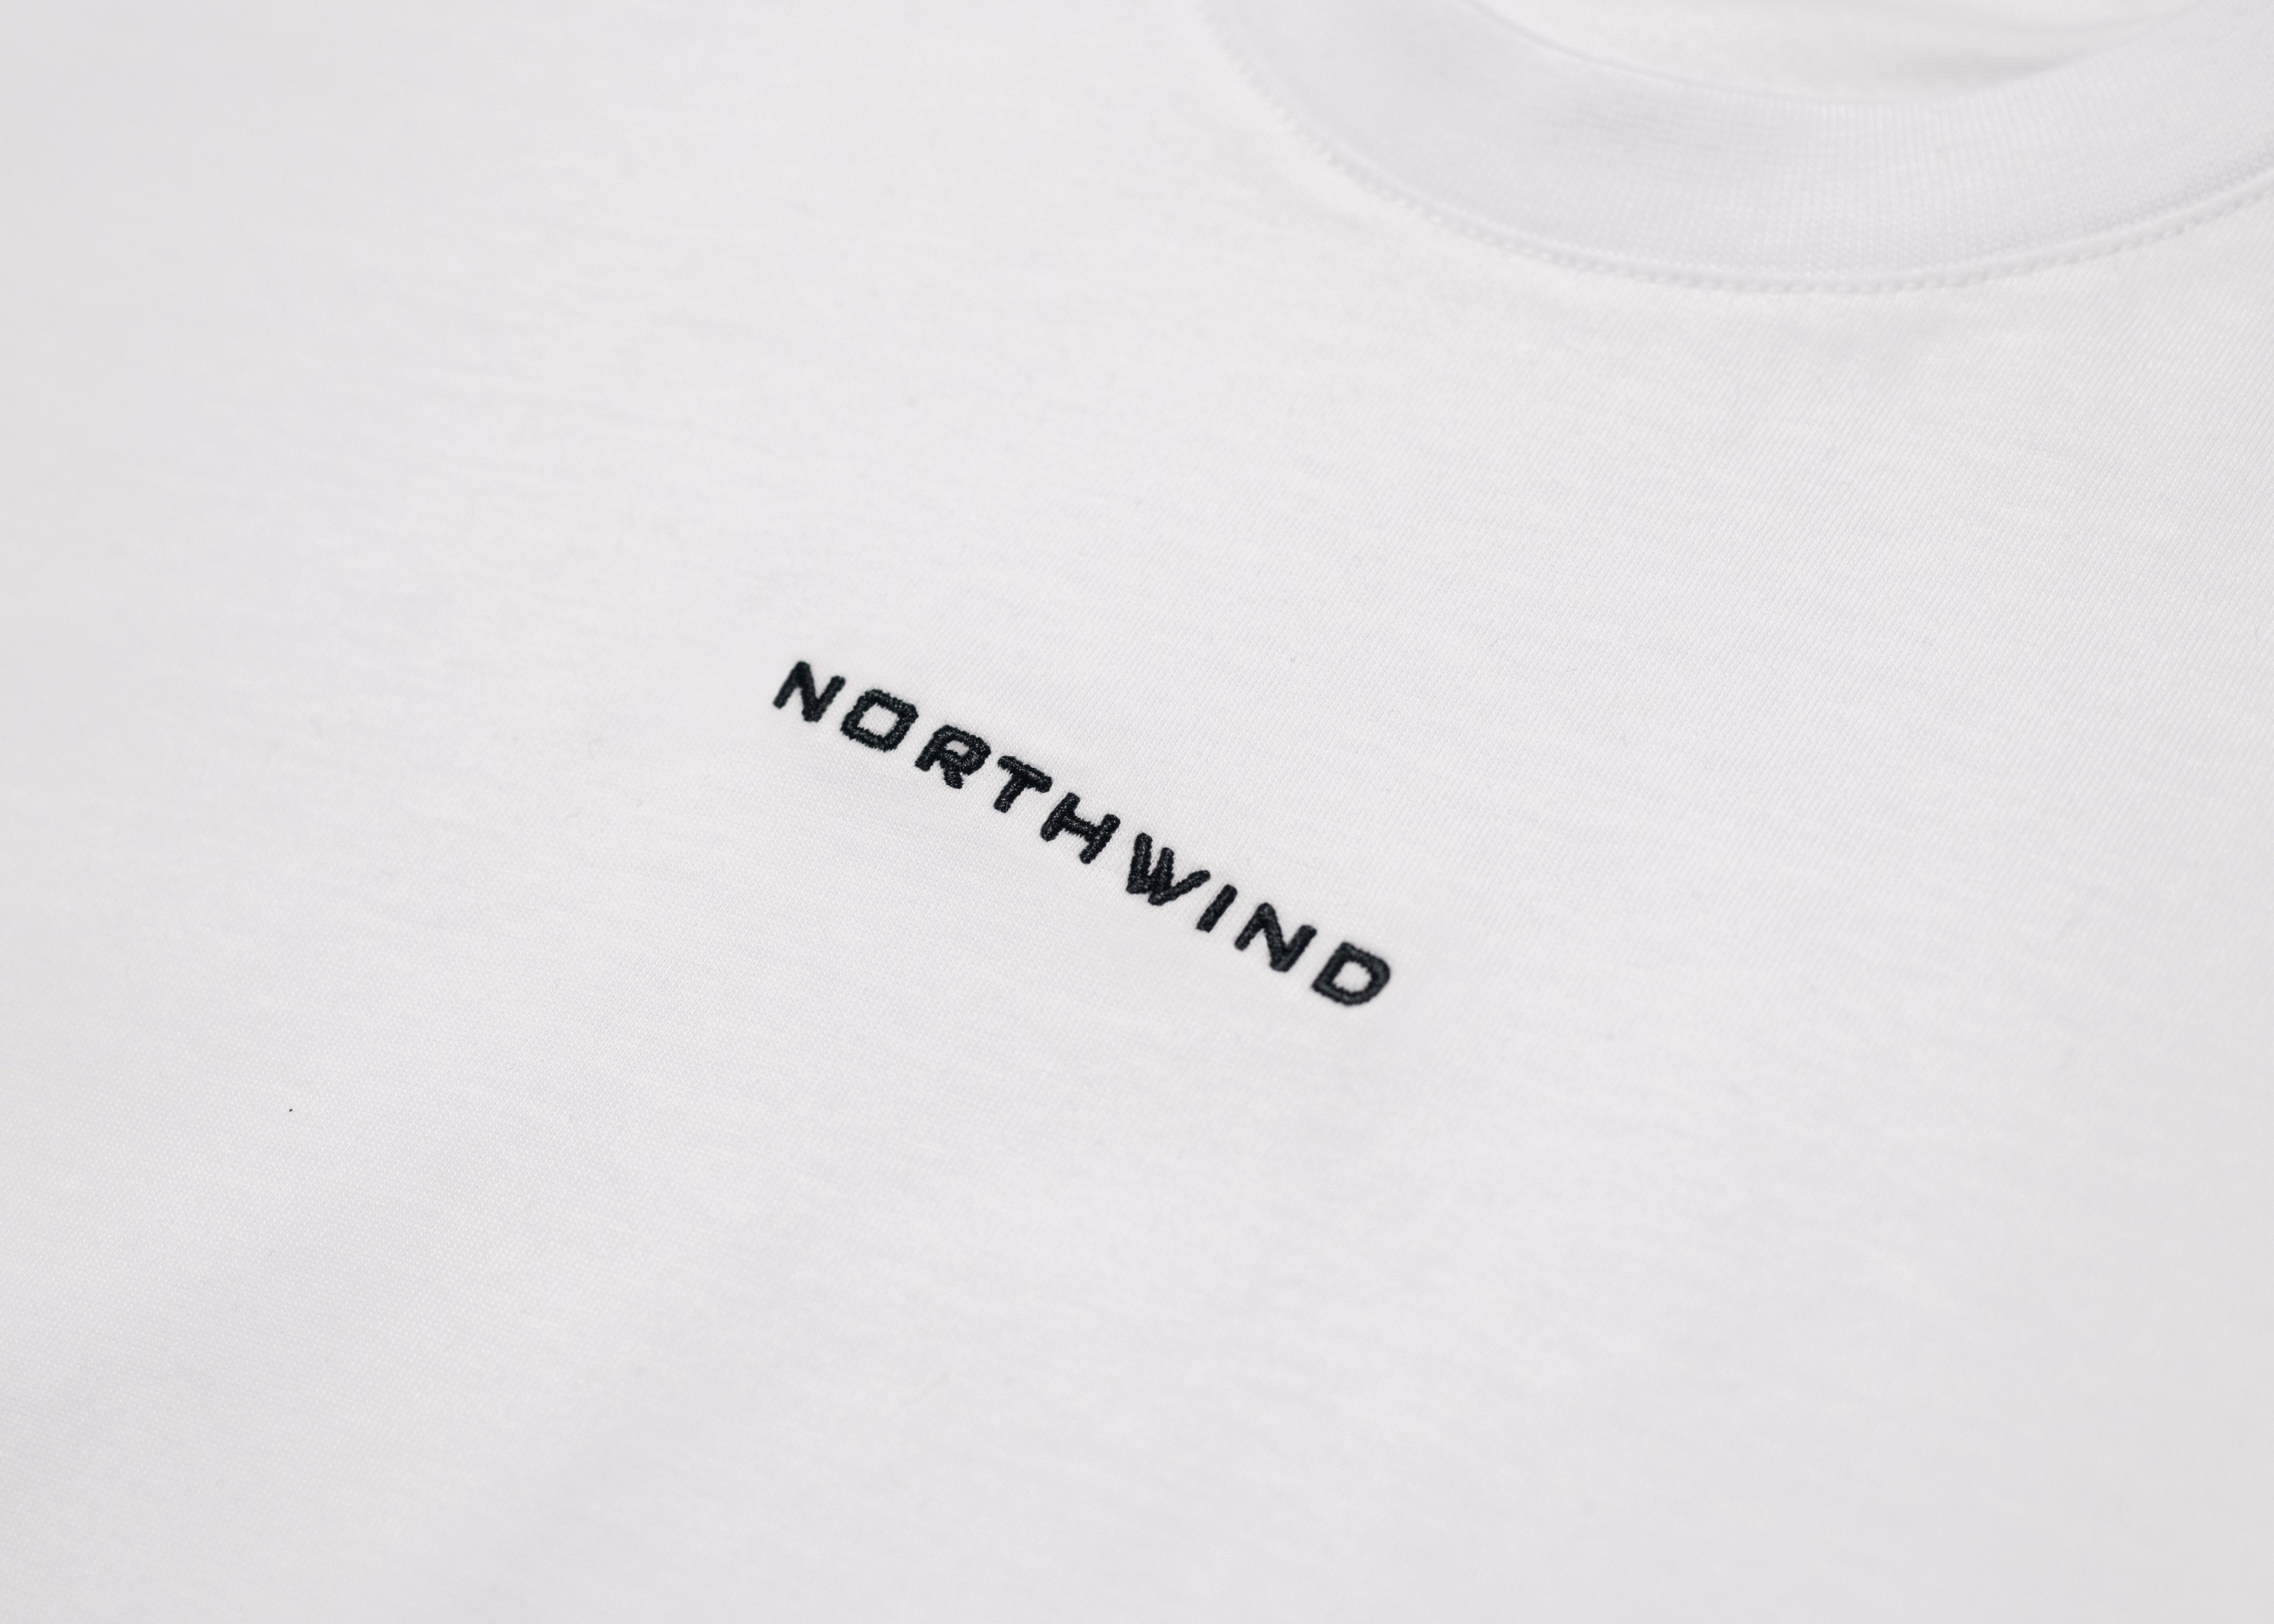 Northwind | Paris Essential White T-shirt with Logo Embroidery